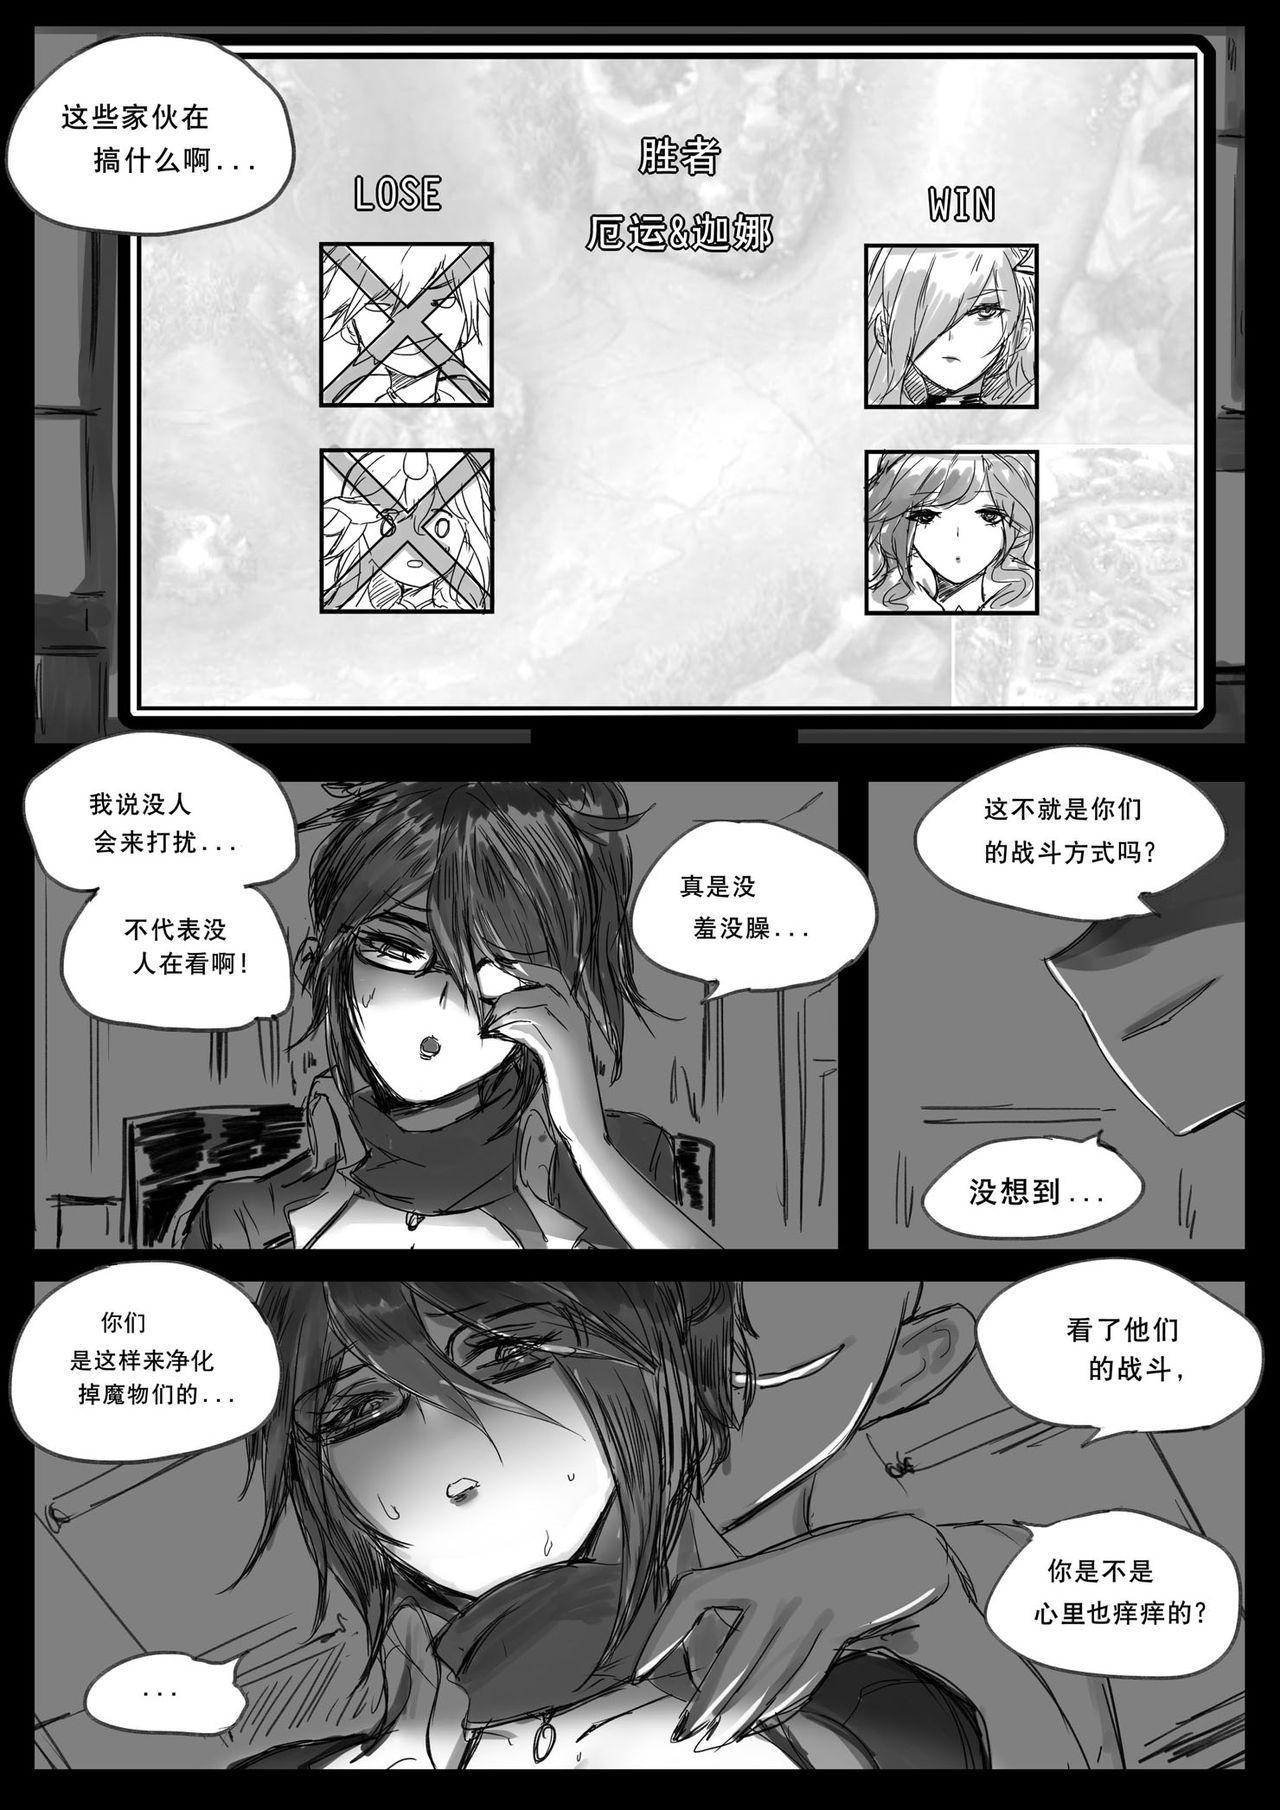 Soloboy 守护者之Xing2 - League of legends Flogging - Page 45